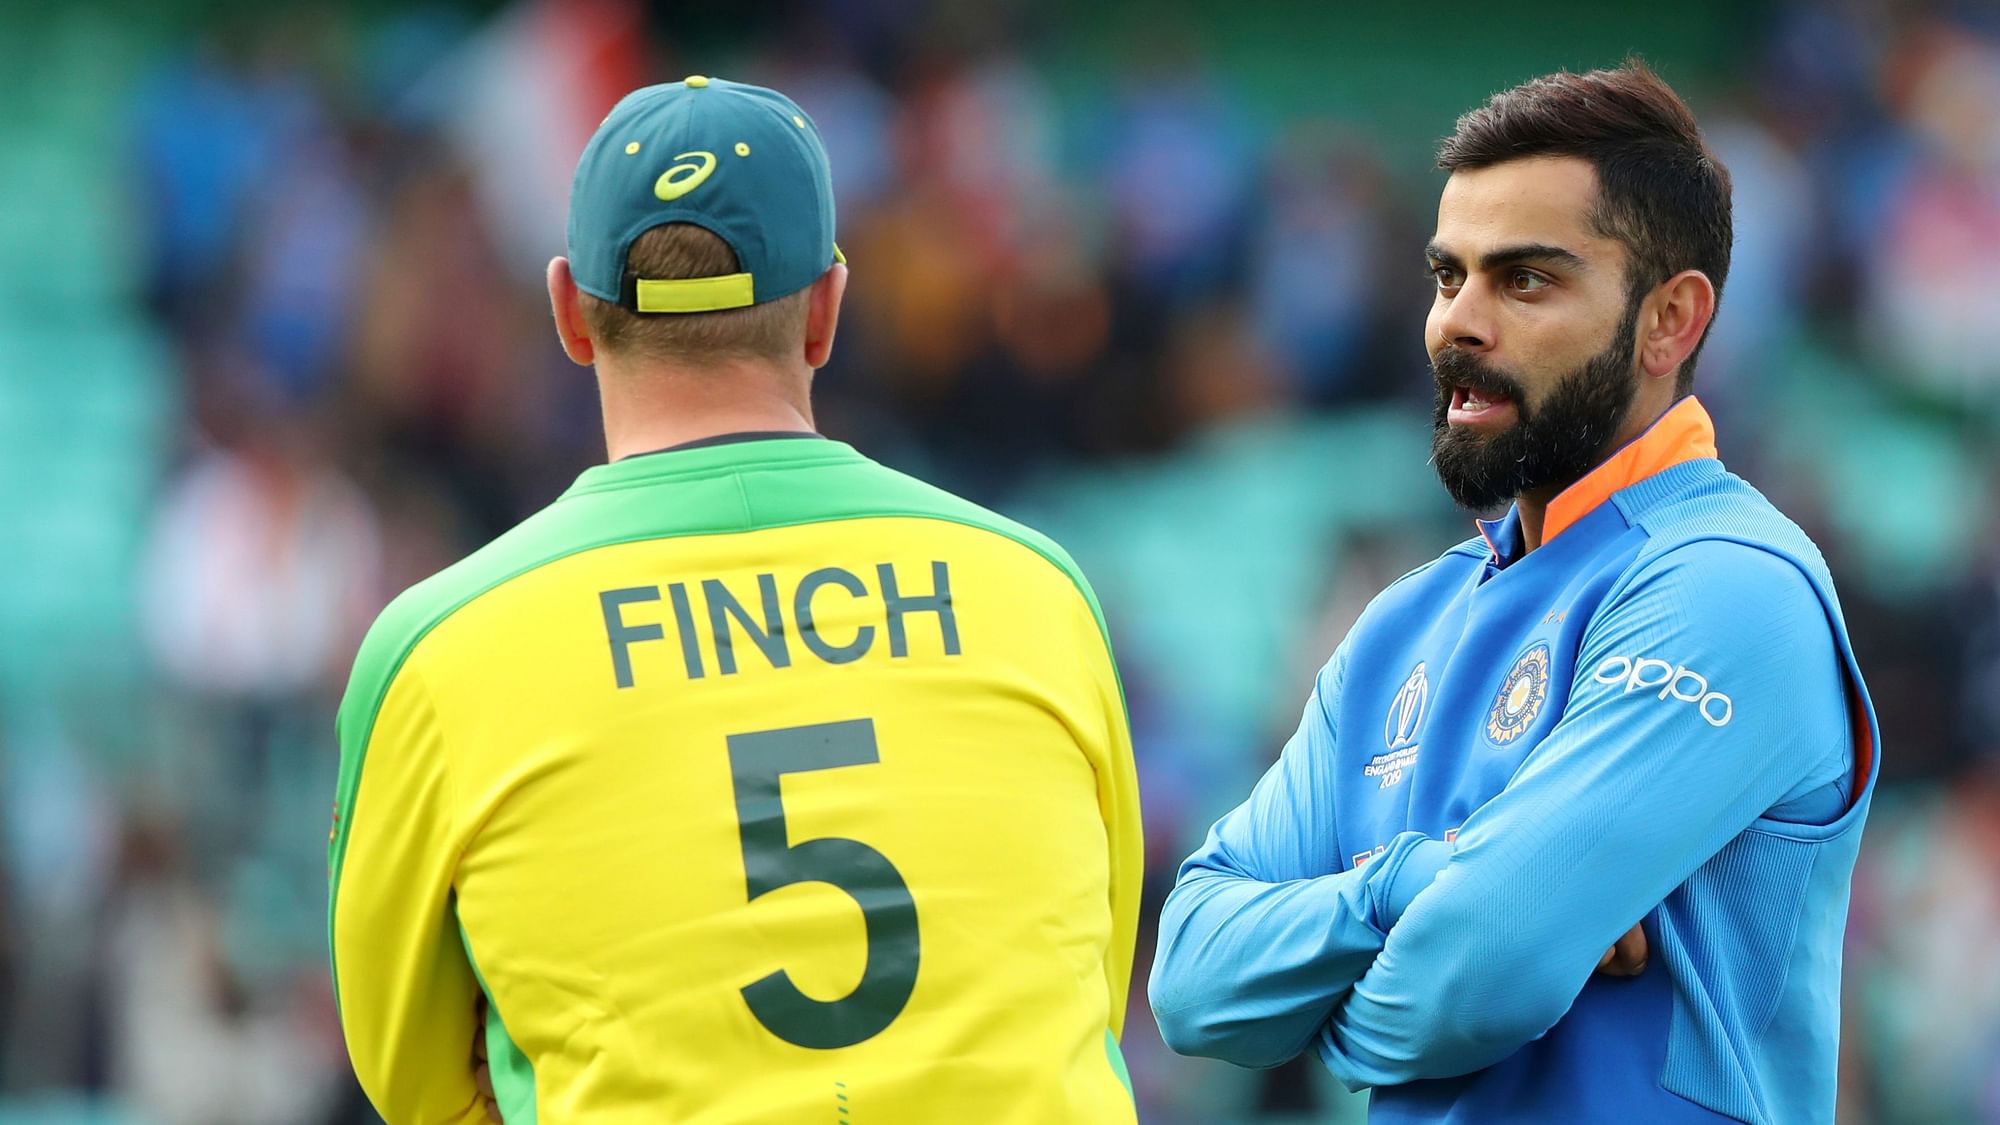 India captain Virat Kohli and his Australian counterpart Aaron Finch are not amused by the flashing LED bails that glow at being hit.